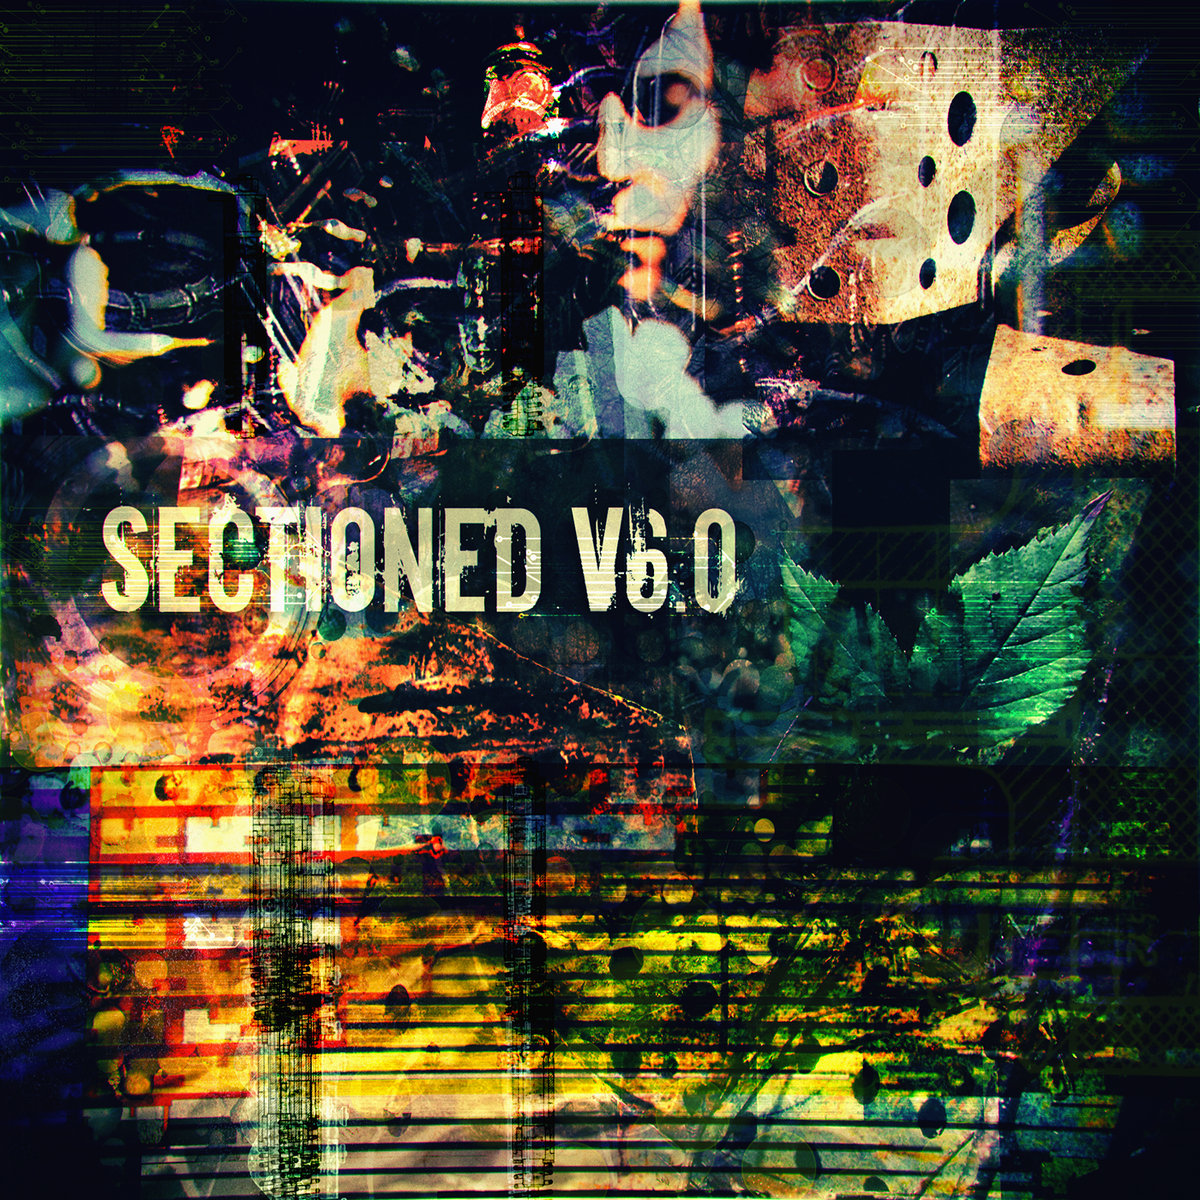 Snowbound On appears on Sectioned 006 compilation